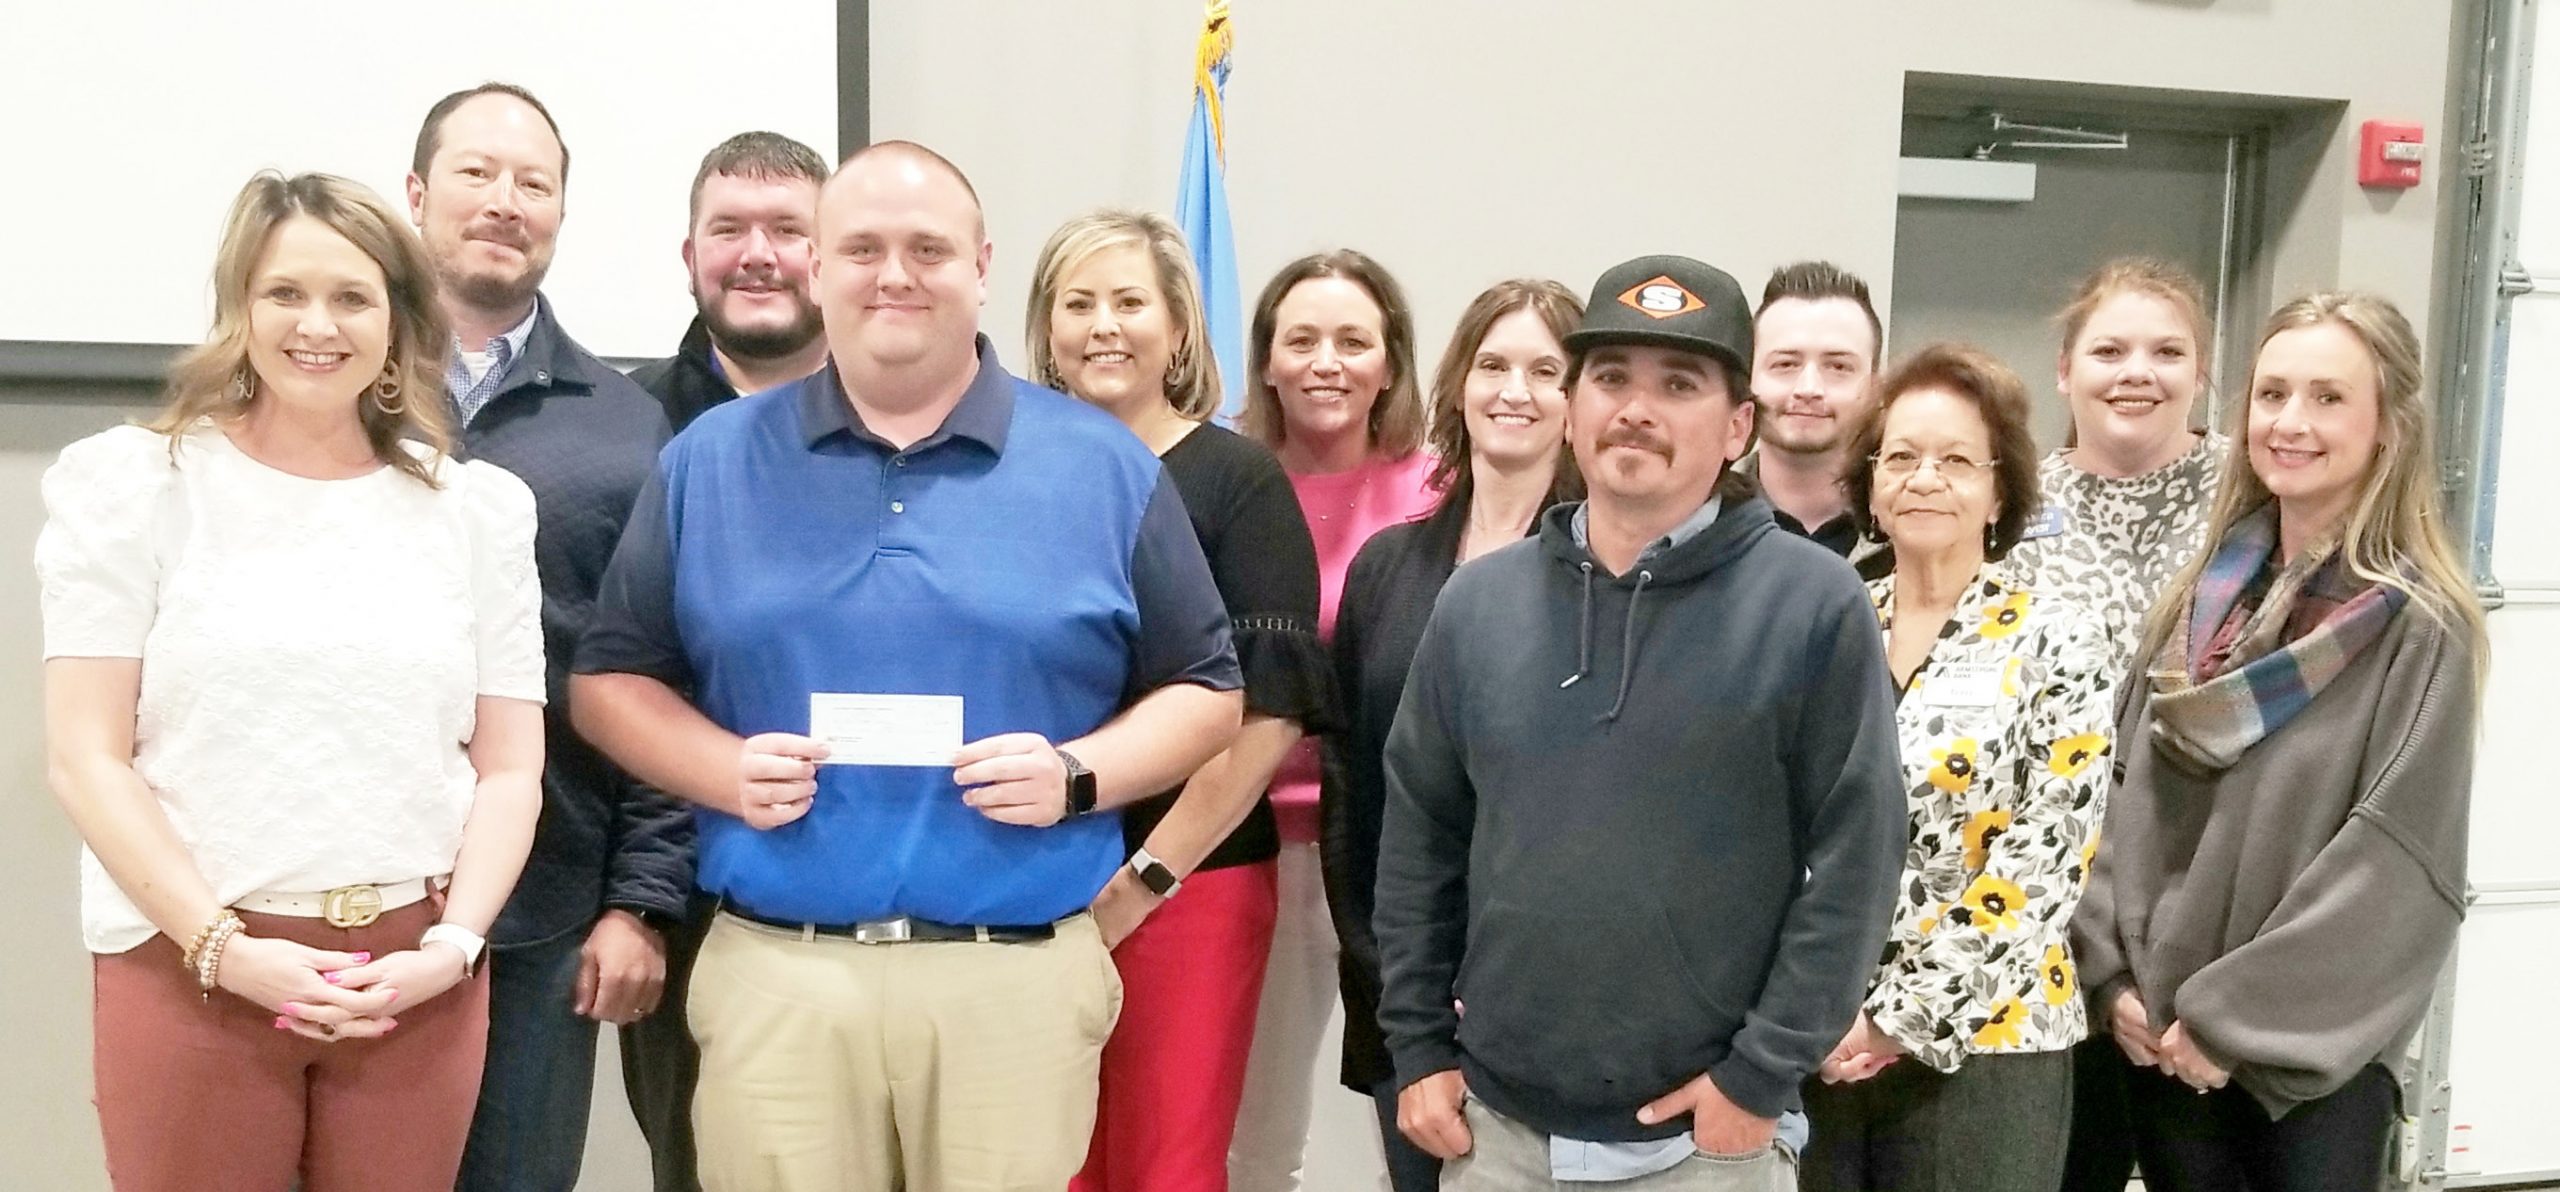 Sallisaw Chamber of Commerce presented a $1,000 check to the Sallisaw Youth League (SYL) for its upcoming baseball state tournament.The check was presented by chamber president Nikki Garrett to Jared Johnson, secretary/treasurer for SYL, and was joined by chamber board members. LYNN ADAMS | TIMES